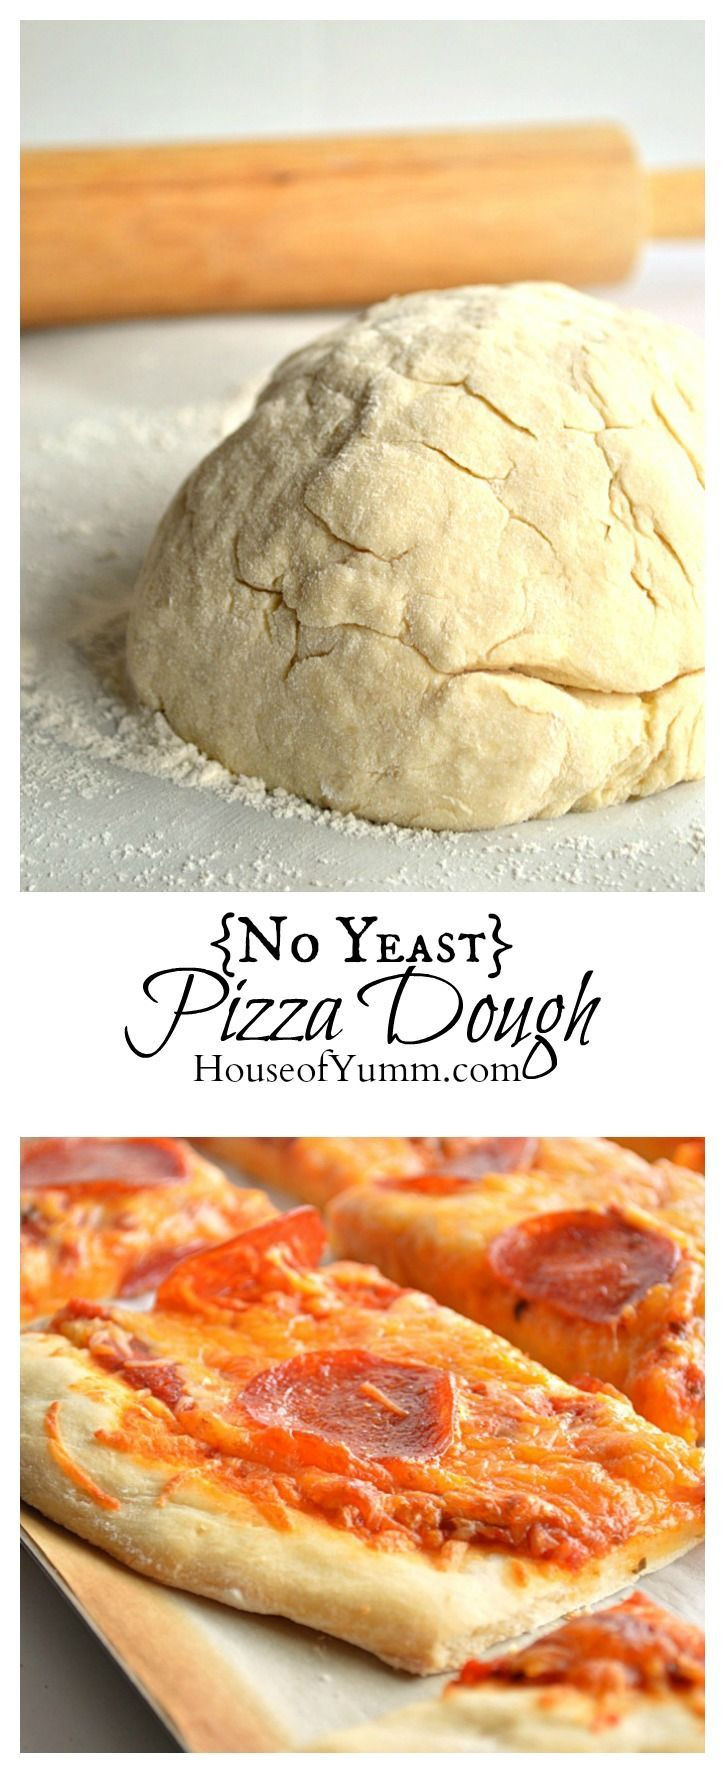 Pizza Dough Recipe With Yeast
 25 best ideas about No yeast pizza dough on Pinterest